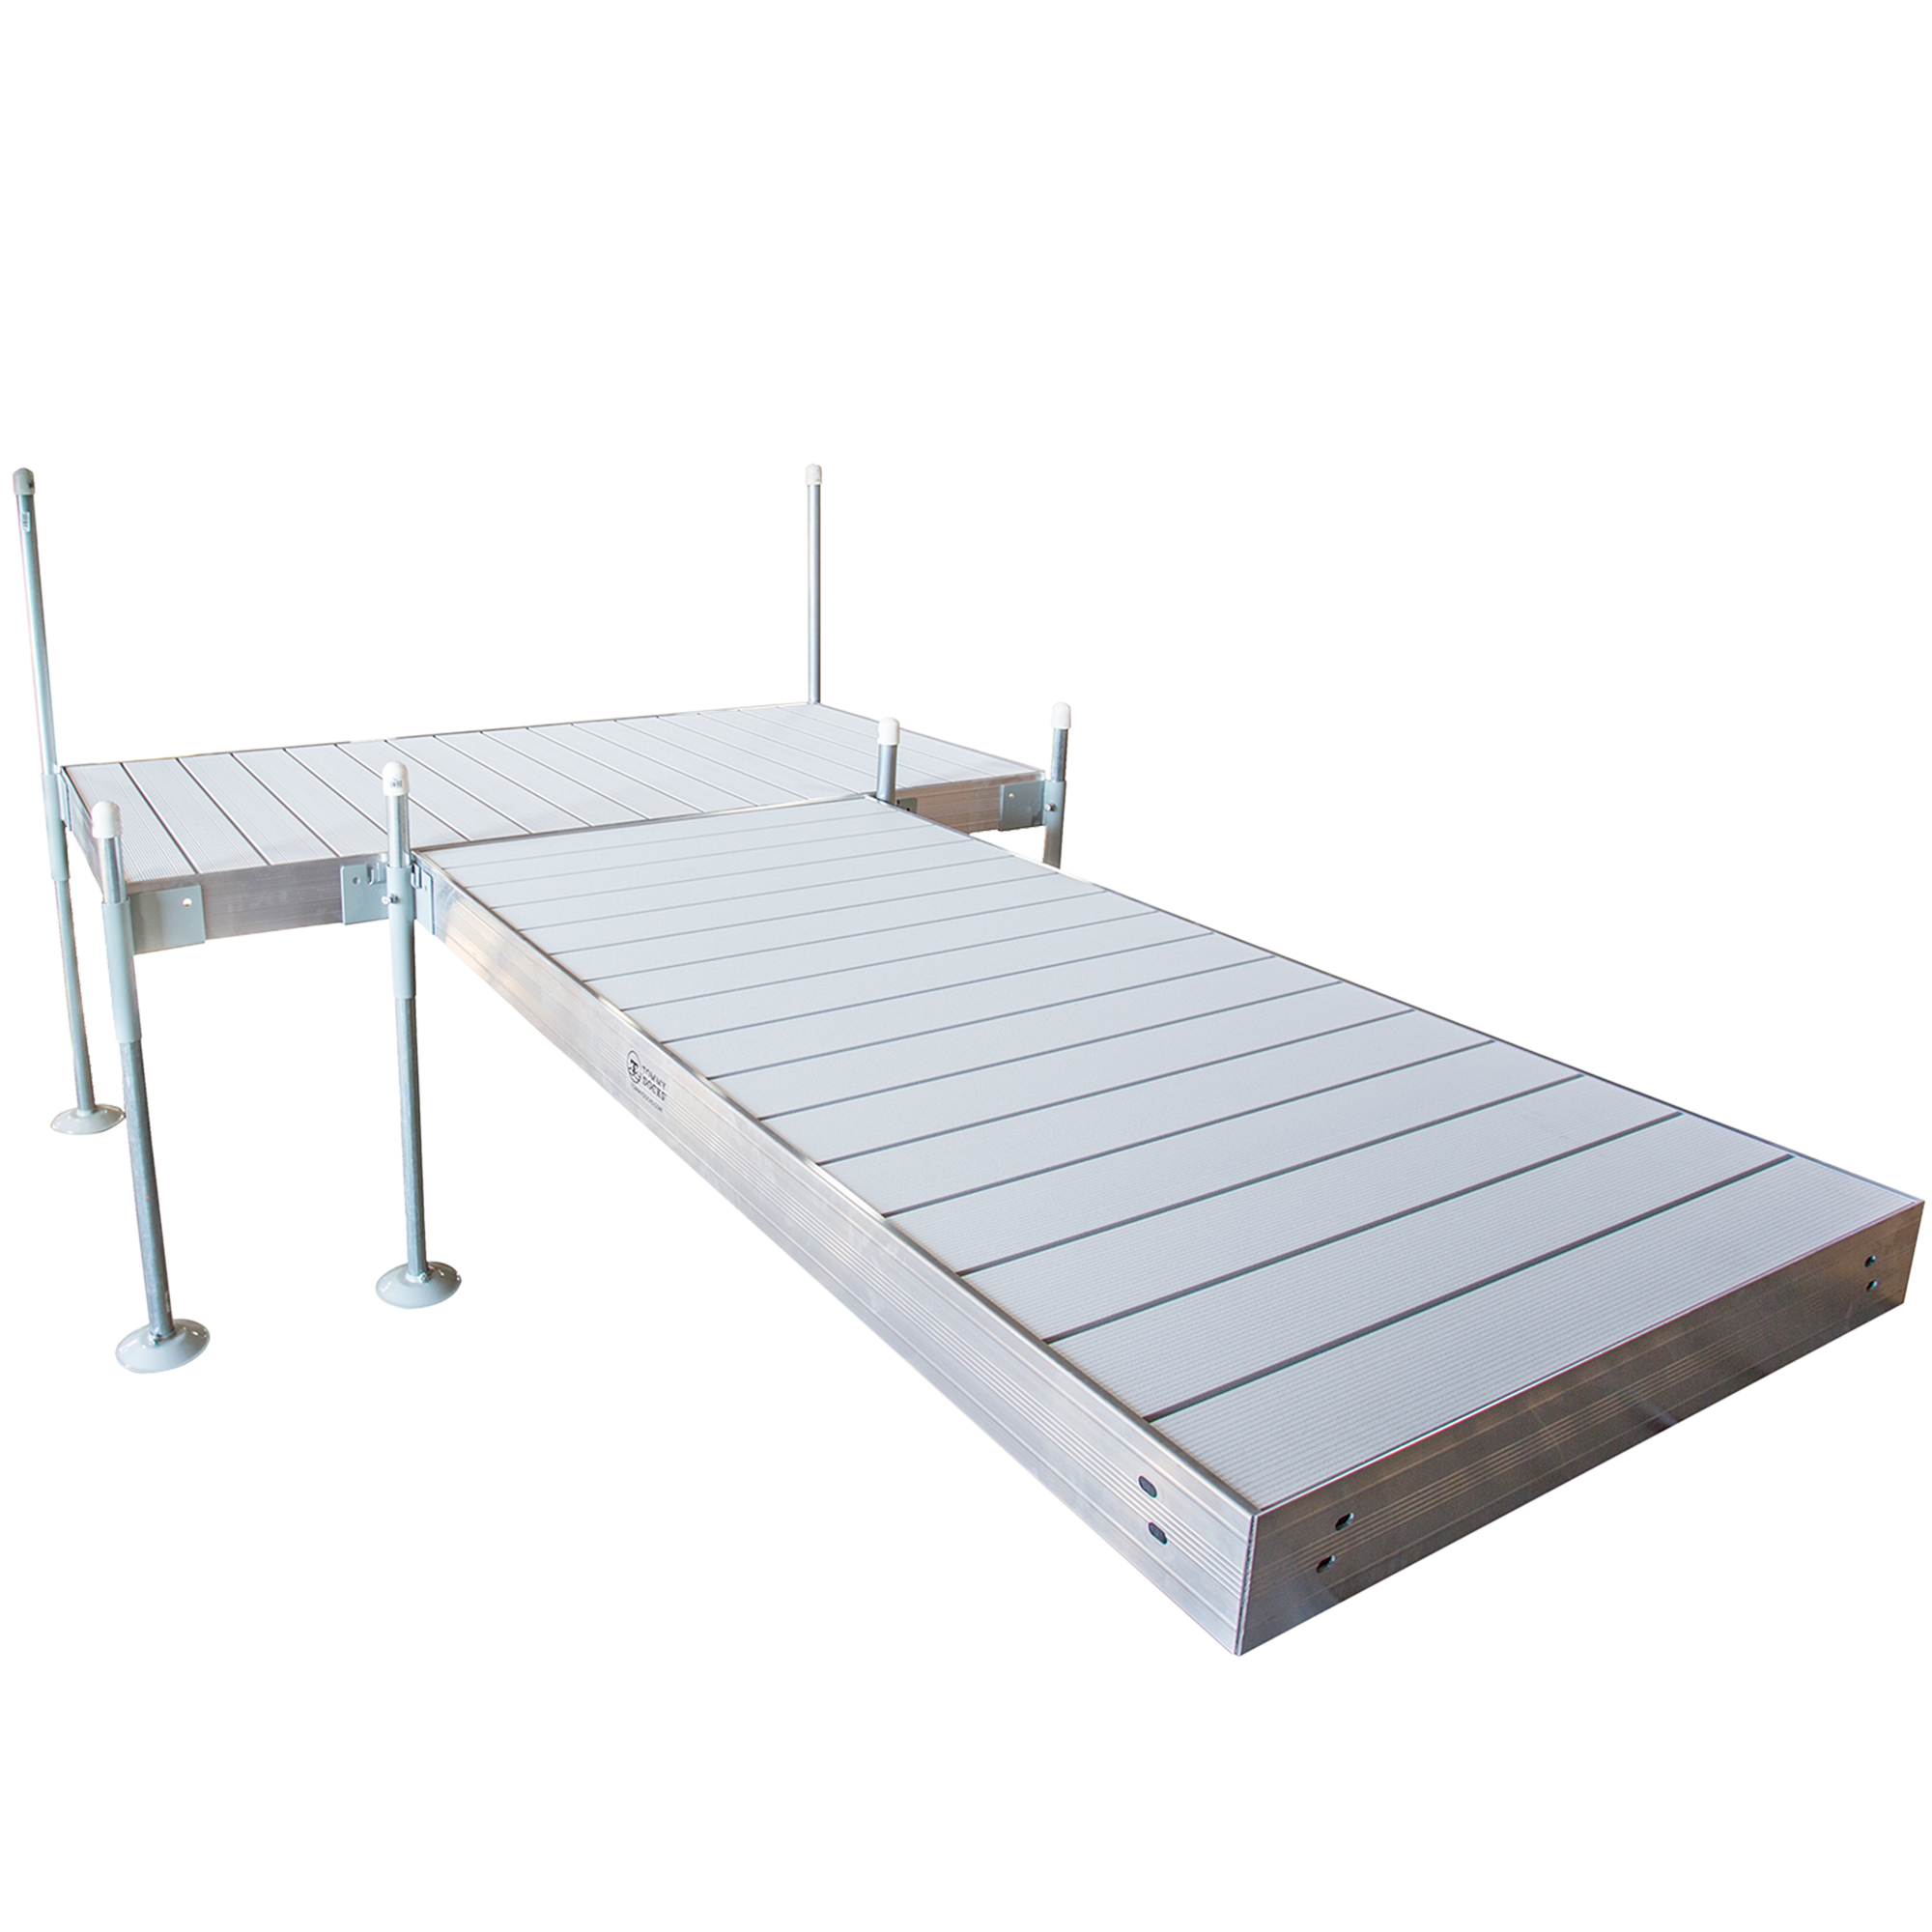 12’ T-Shaped Boat Dock System with Aluminum Frame and Aluminum Decking